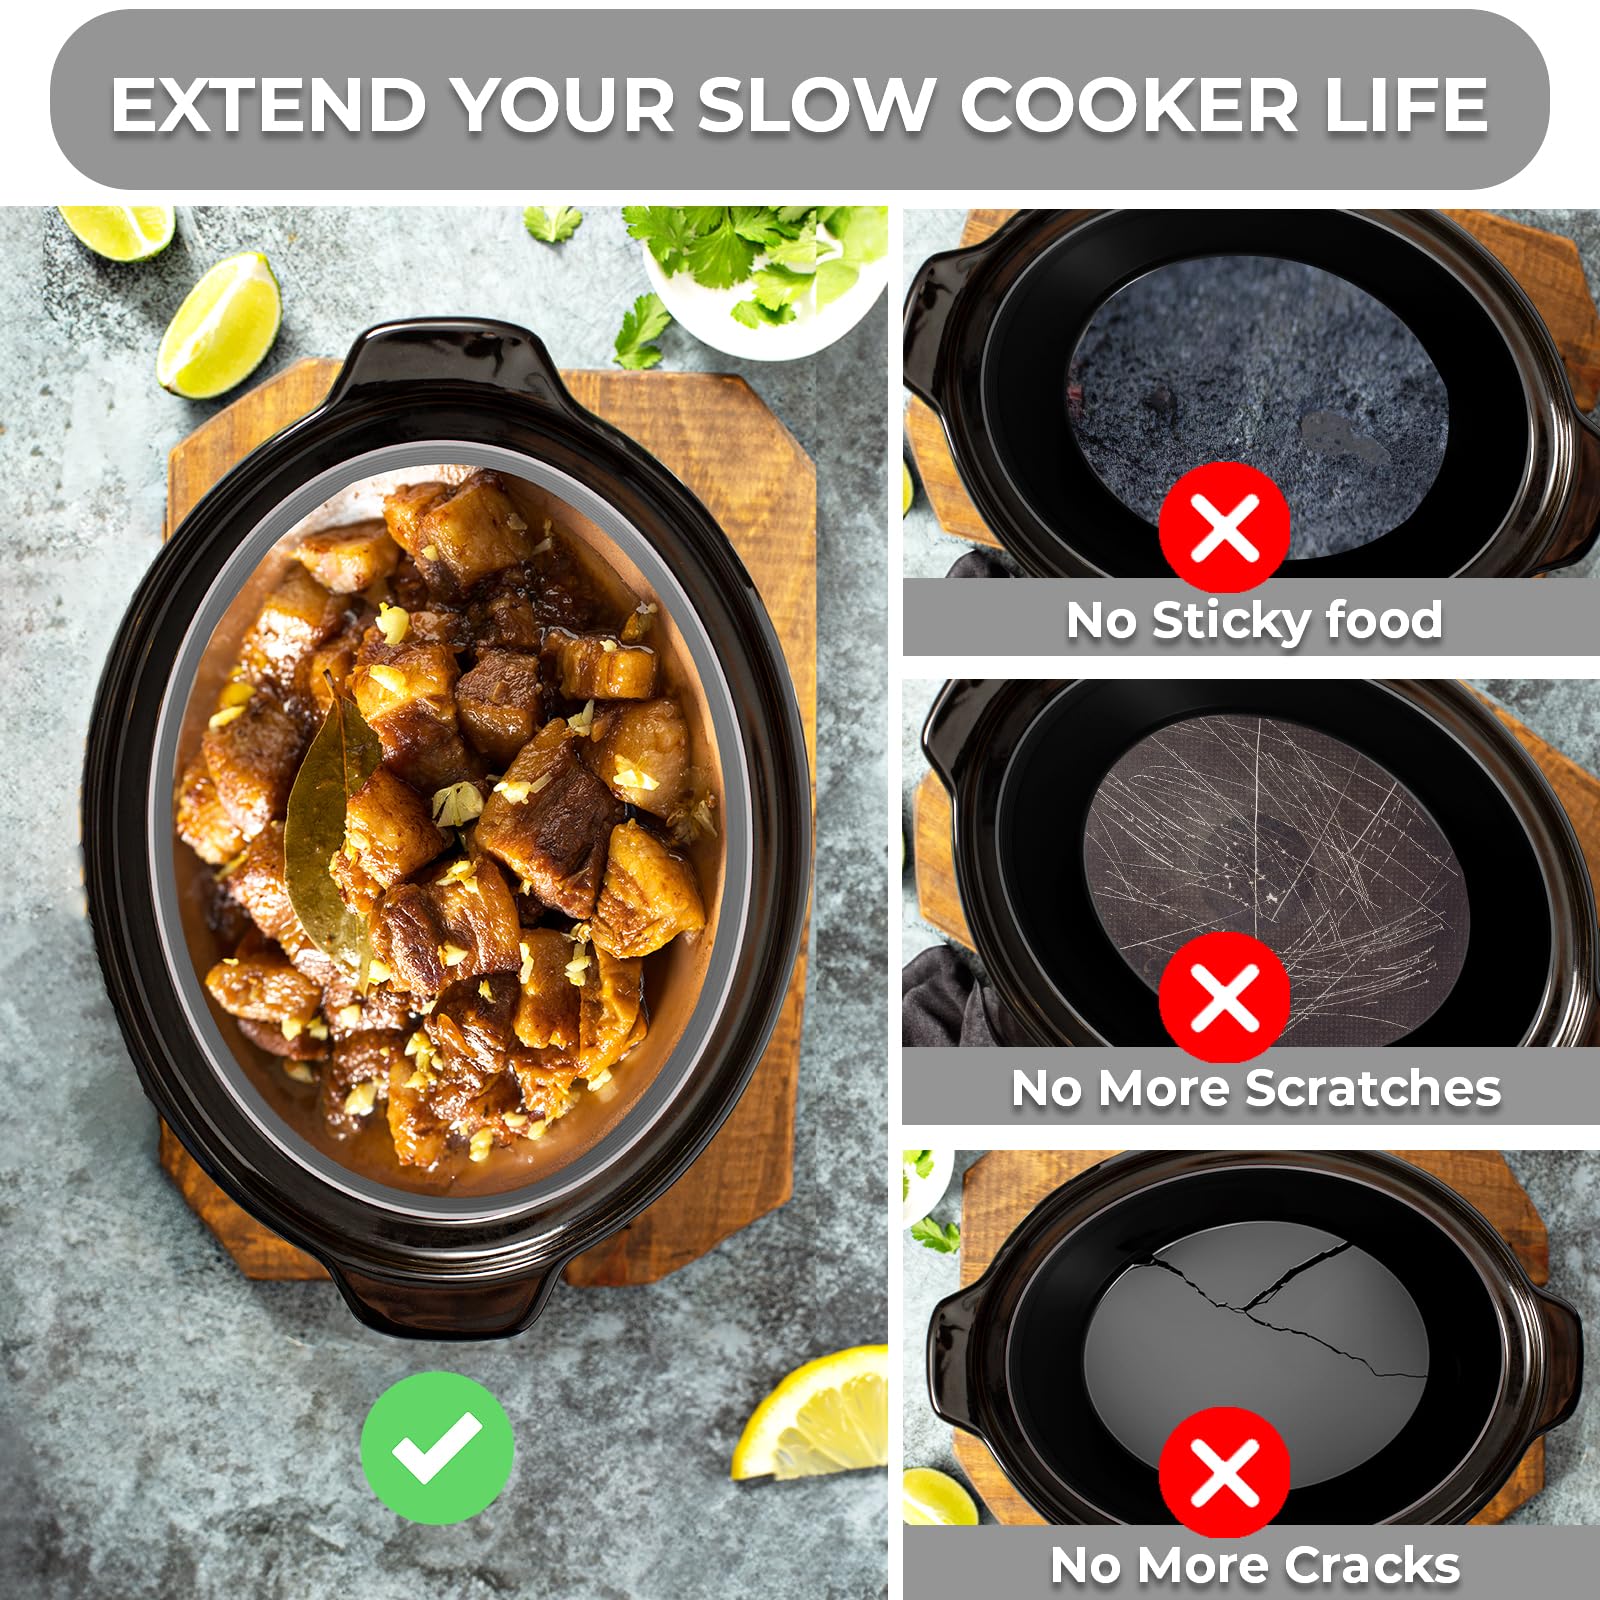 Silicone Slow Cooker Liners for 7-8QT CrockPot and other Oval Slow Cookers - Silicone Crock Pot Liners for 7-8 Quart Crock Pots - Reusable, Leakproof & Food-Grade Silicone Crock Pot Inserts - (Gray)